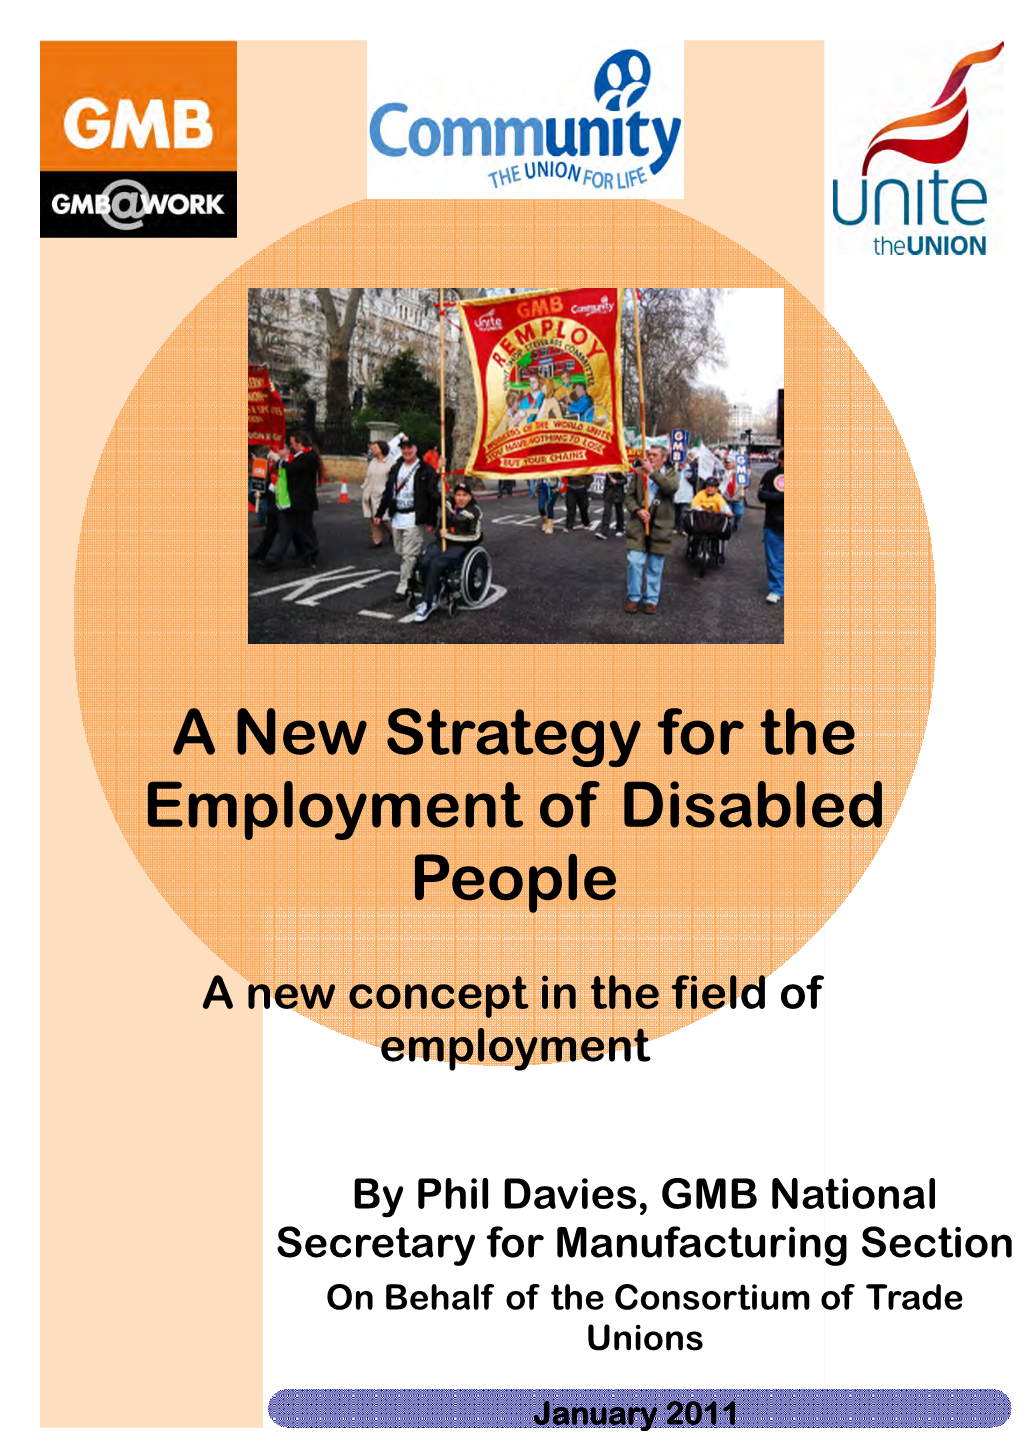 A New Strategy for the Employment of Disabled People